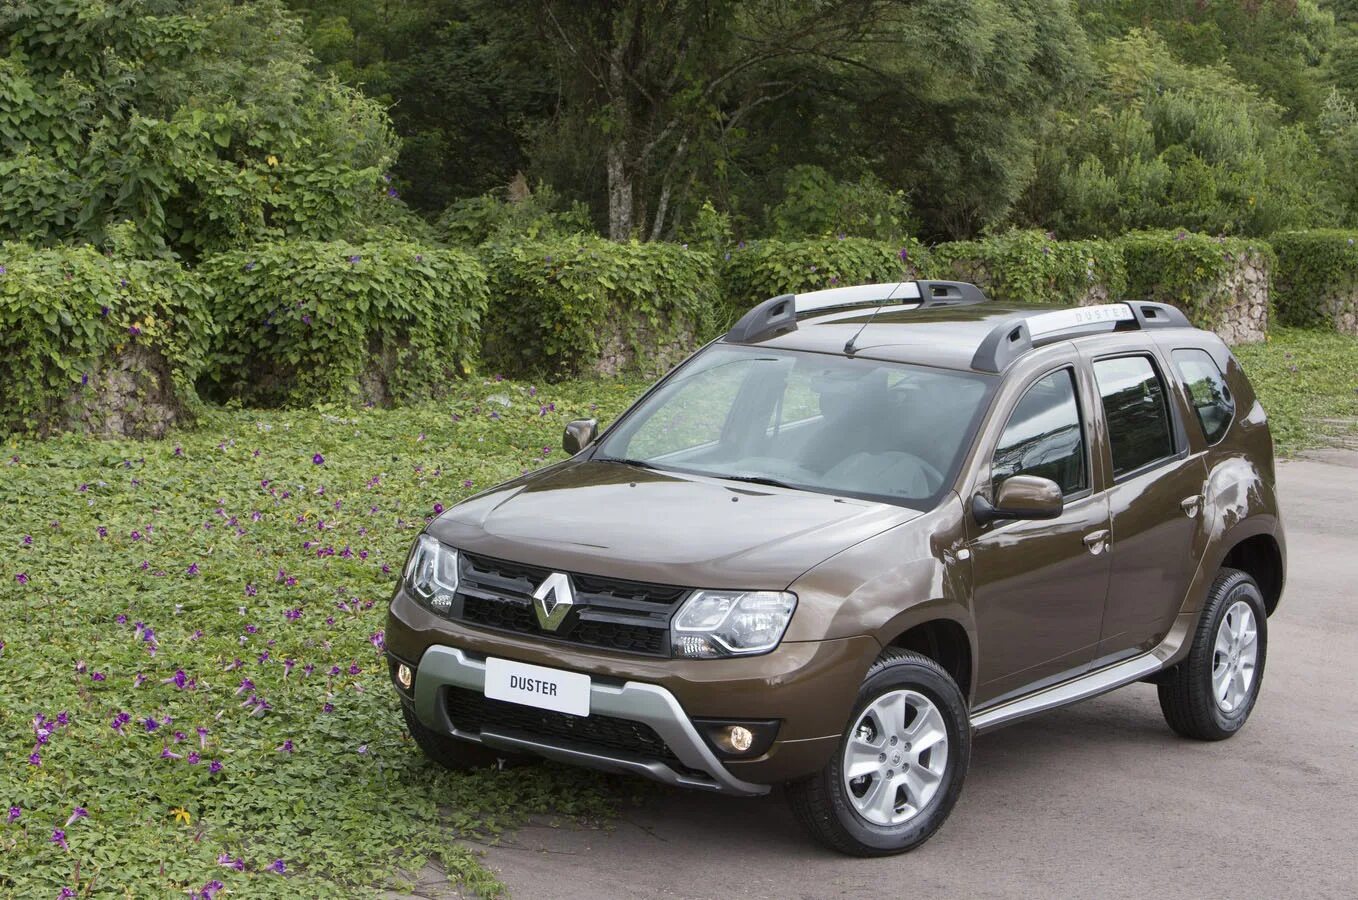 Renault Duster 2015. Рено Дастер 2015. Автомобиль Рено Дастер 2015. Рено Дастер Рено Дастер. Купить рено дастер 2015 год